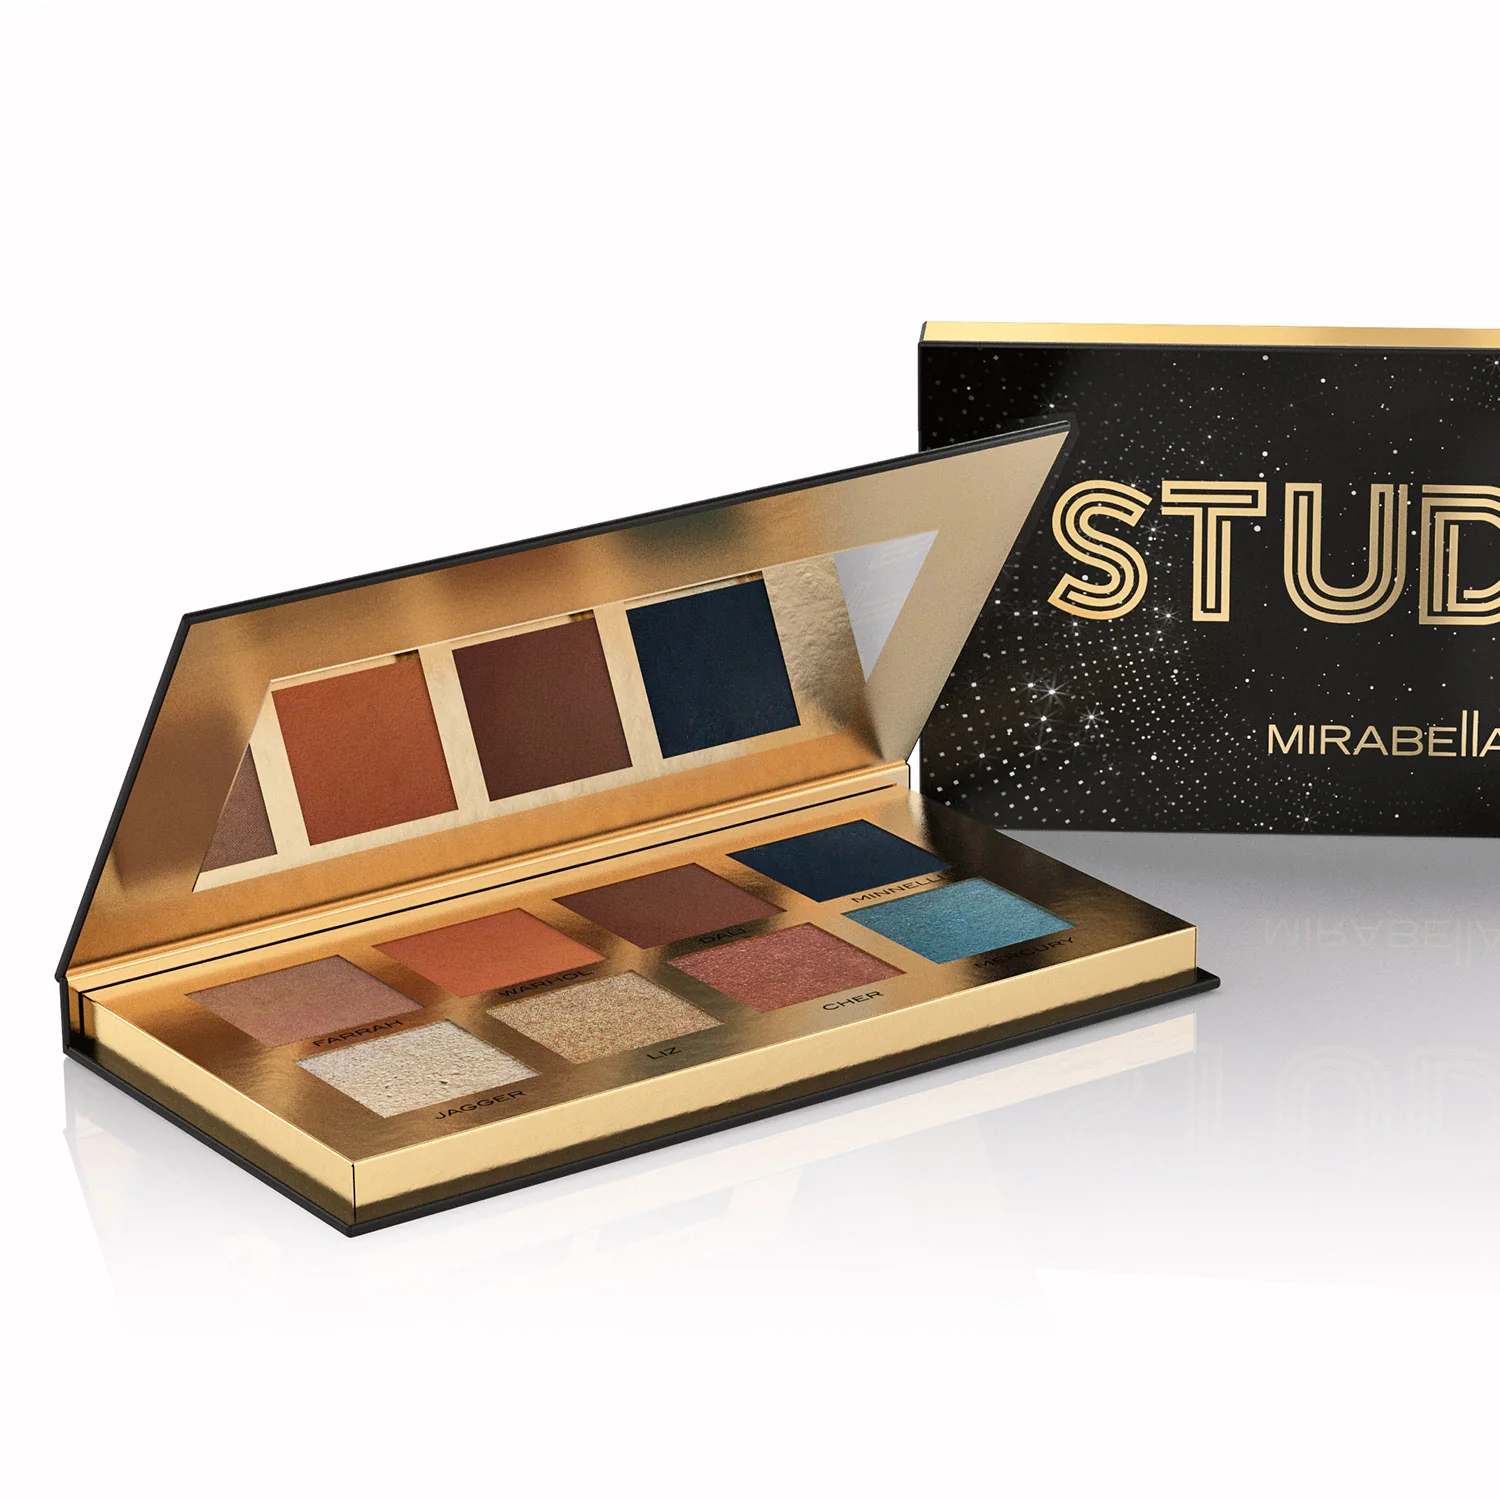 Primary image for MIRABELLA BEAUTY  Limited Edition Studio Eyeshadow Collection